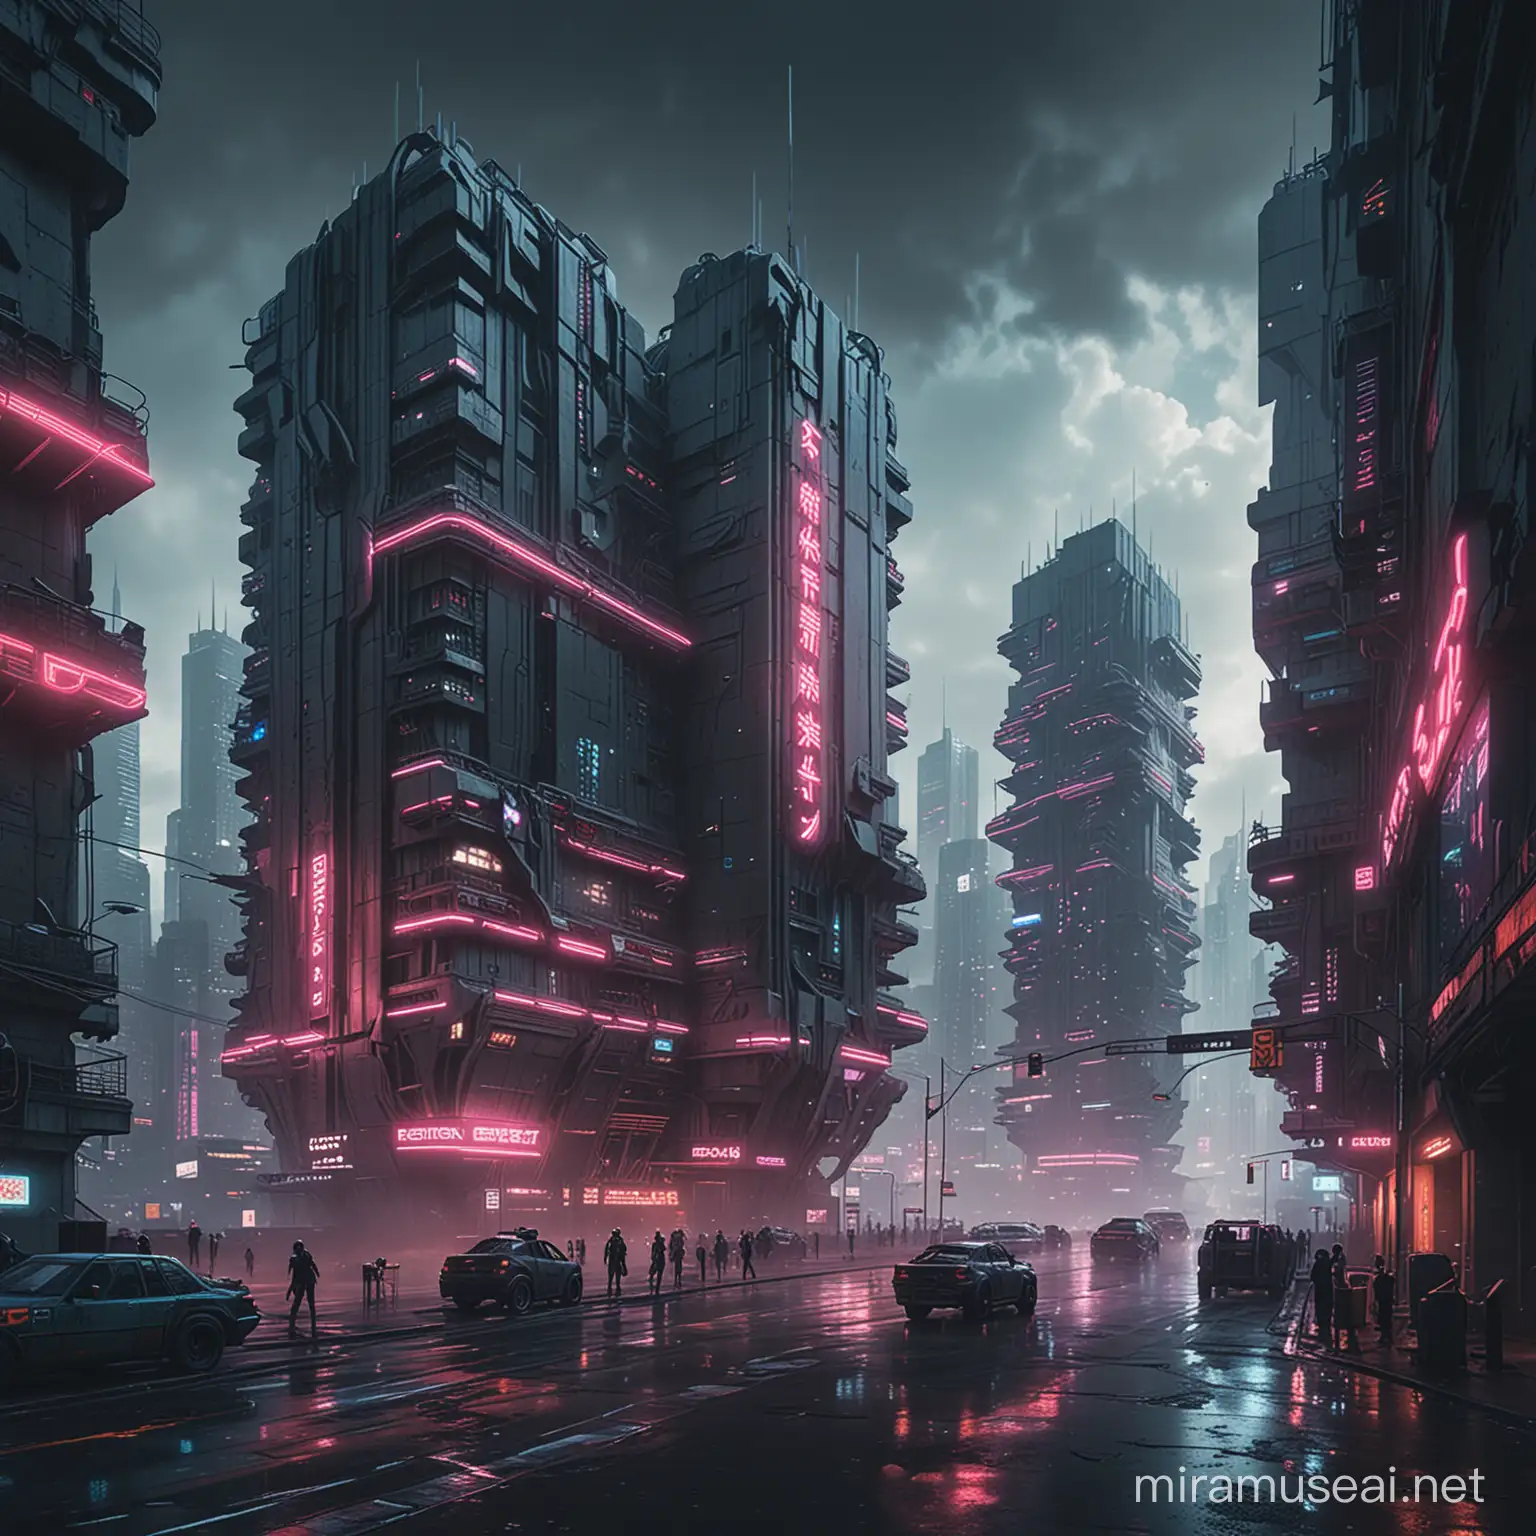  The city is a cyberpunk futuristic  brutalist architecture with a lot of concriete and neon lights